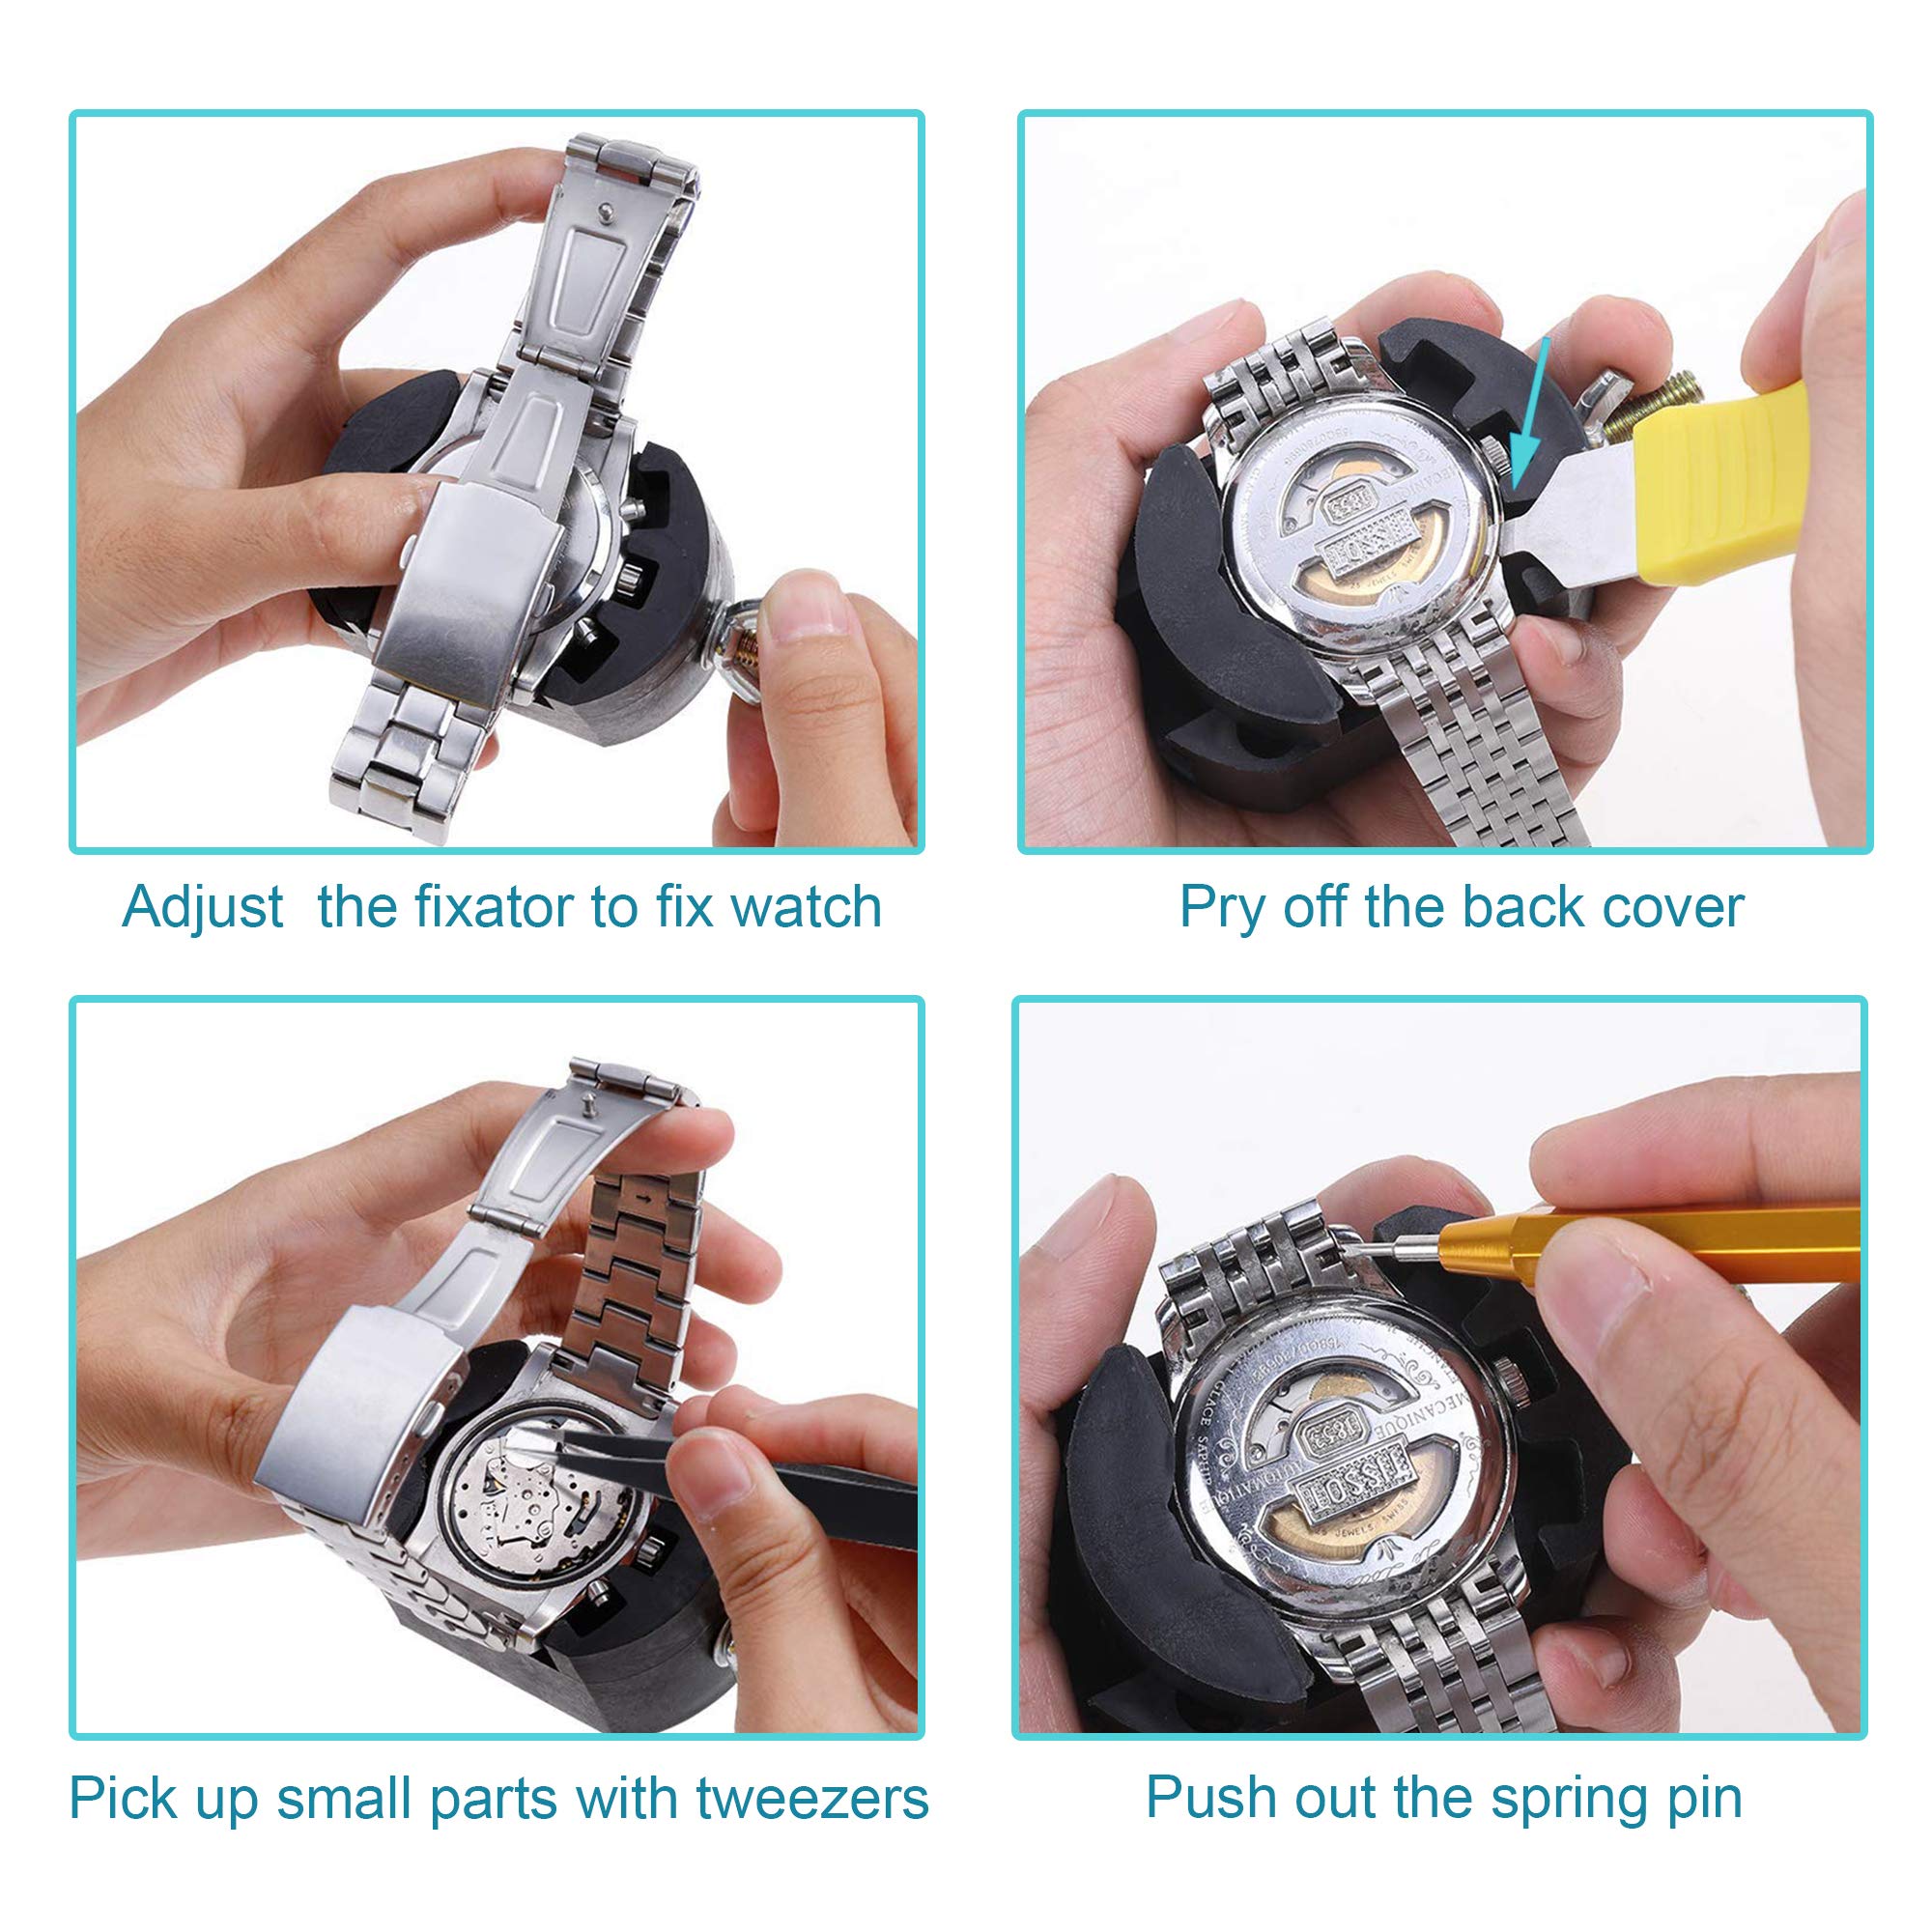 XOOL Watch Replacement Tool Kit Professional Spring Bar Tool Set, Watch Link/Strap/Band/Battery/Pin Replace Kit, Watch Fixing/Adjustment Tool Kit with Carrying Case and Instruction Manual